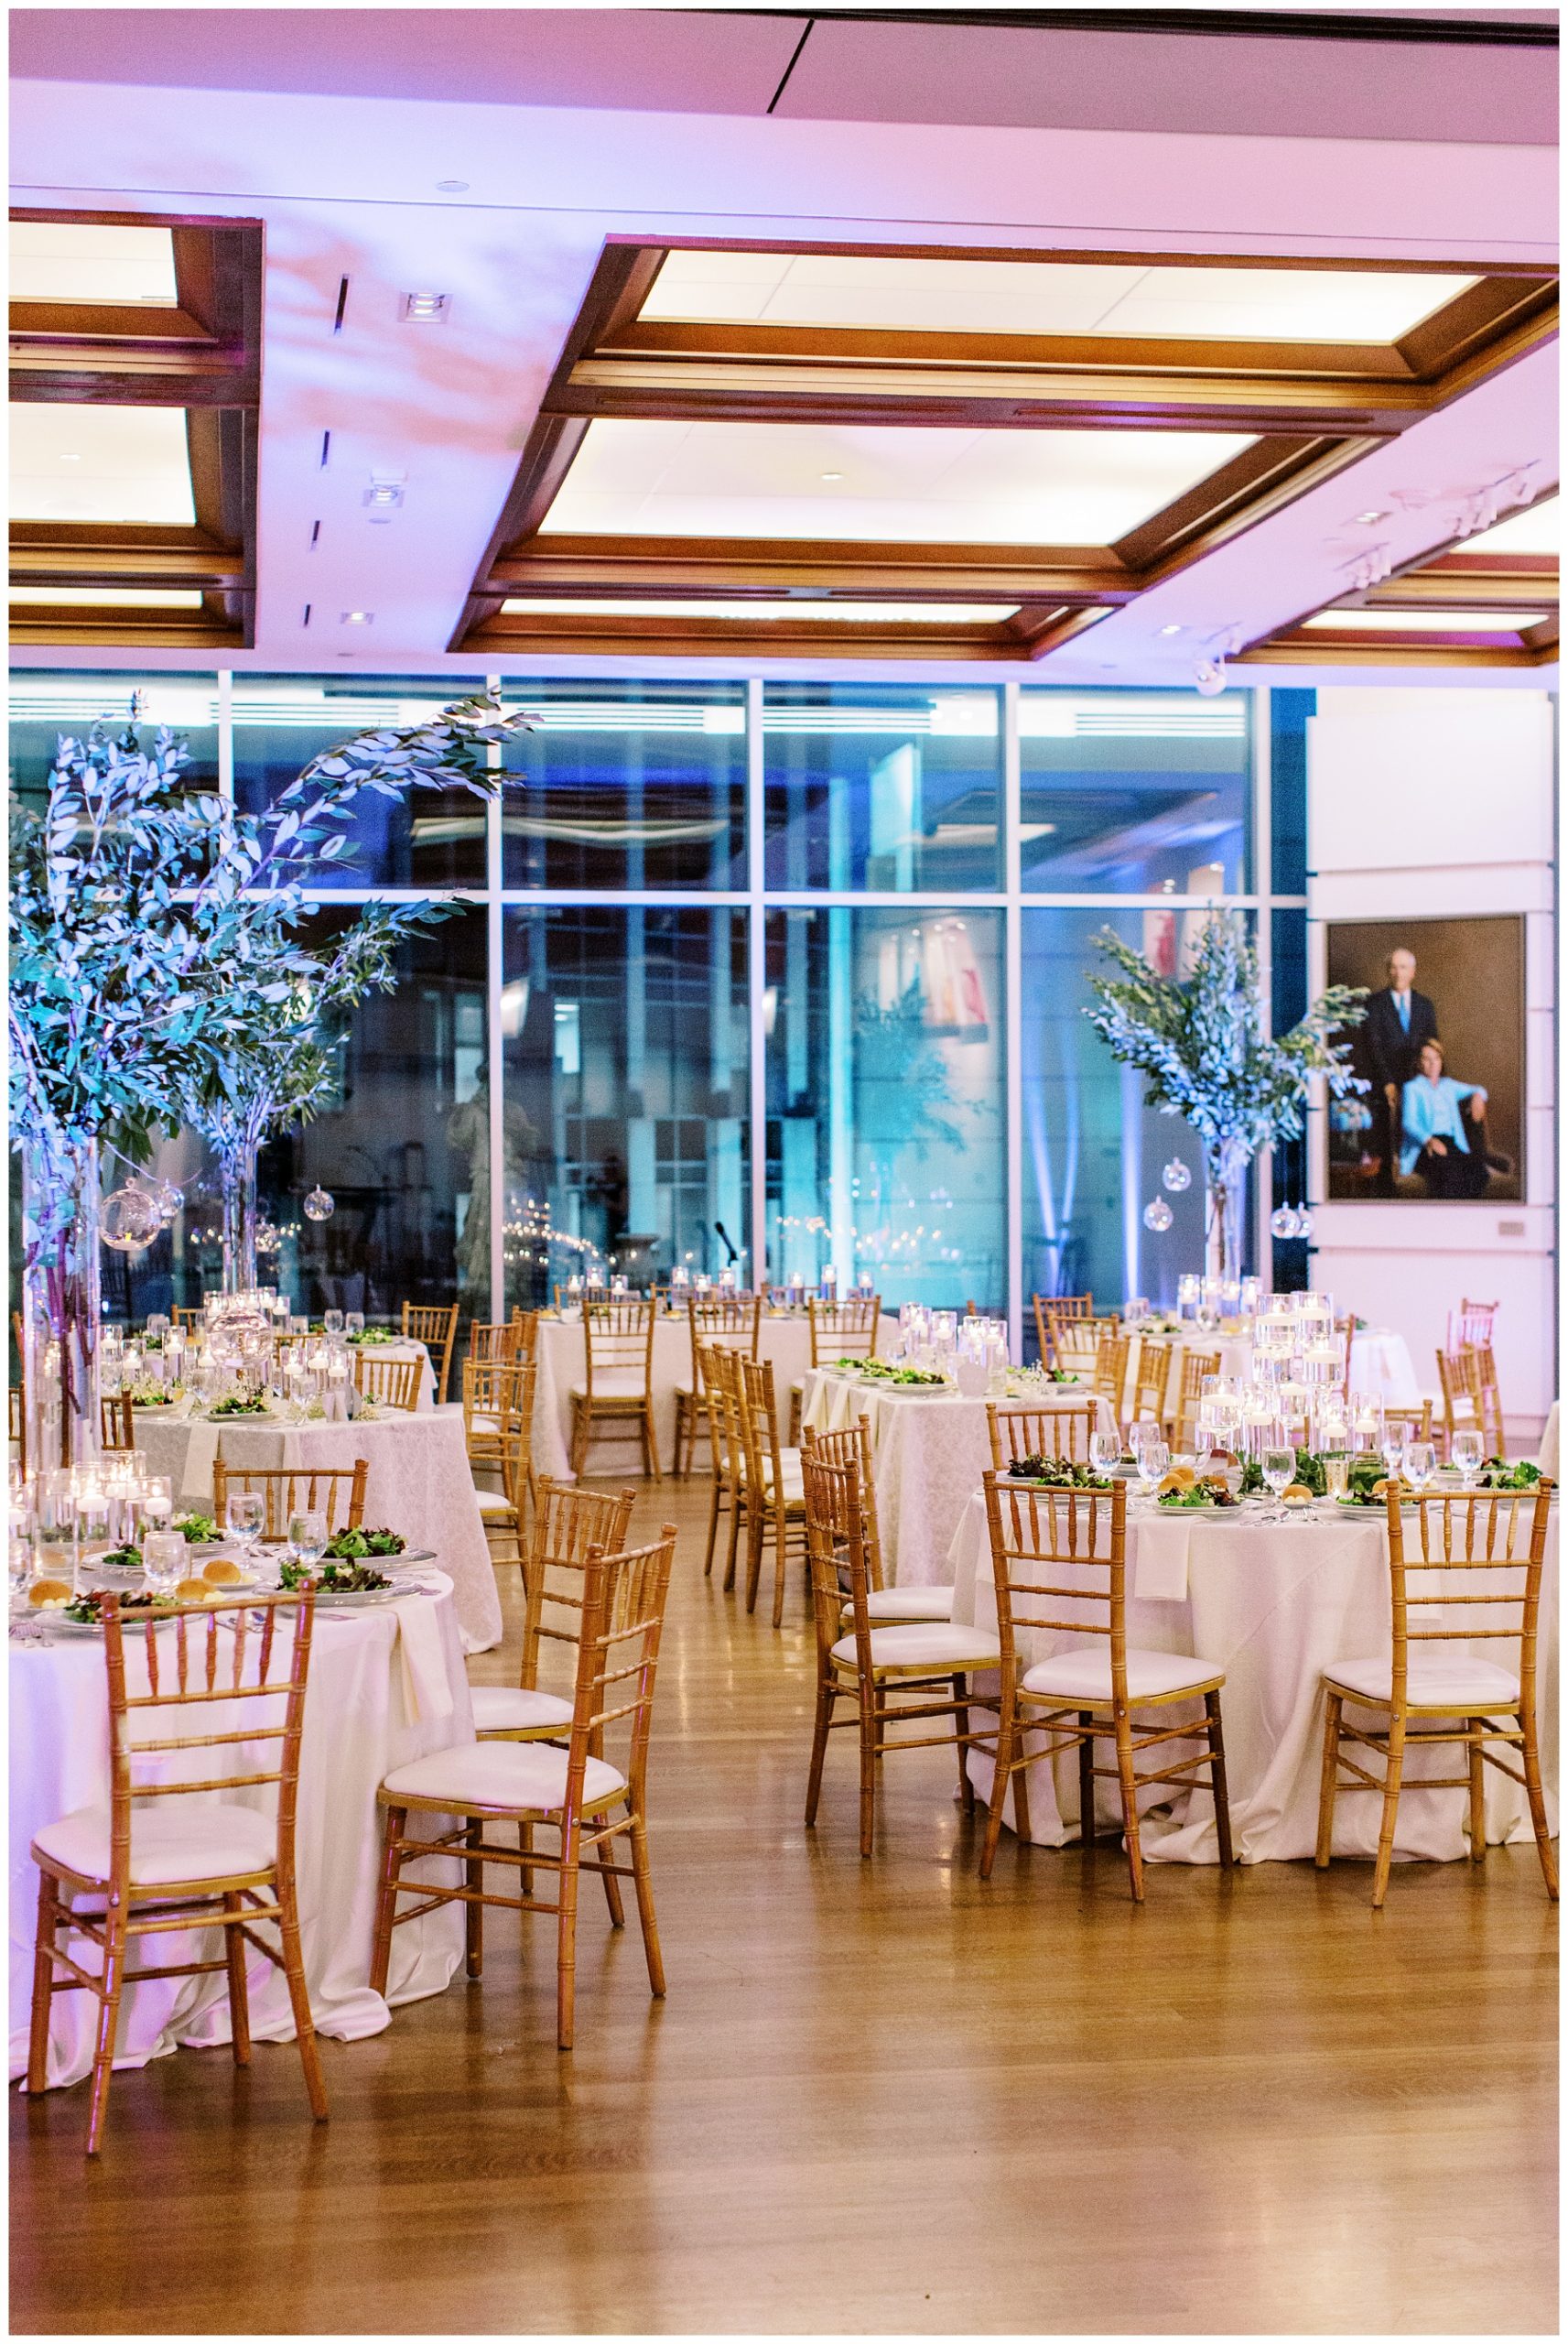 Foundation for the Carolinas wedding reception with gold chairs and white table cloths 